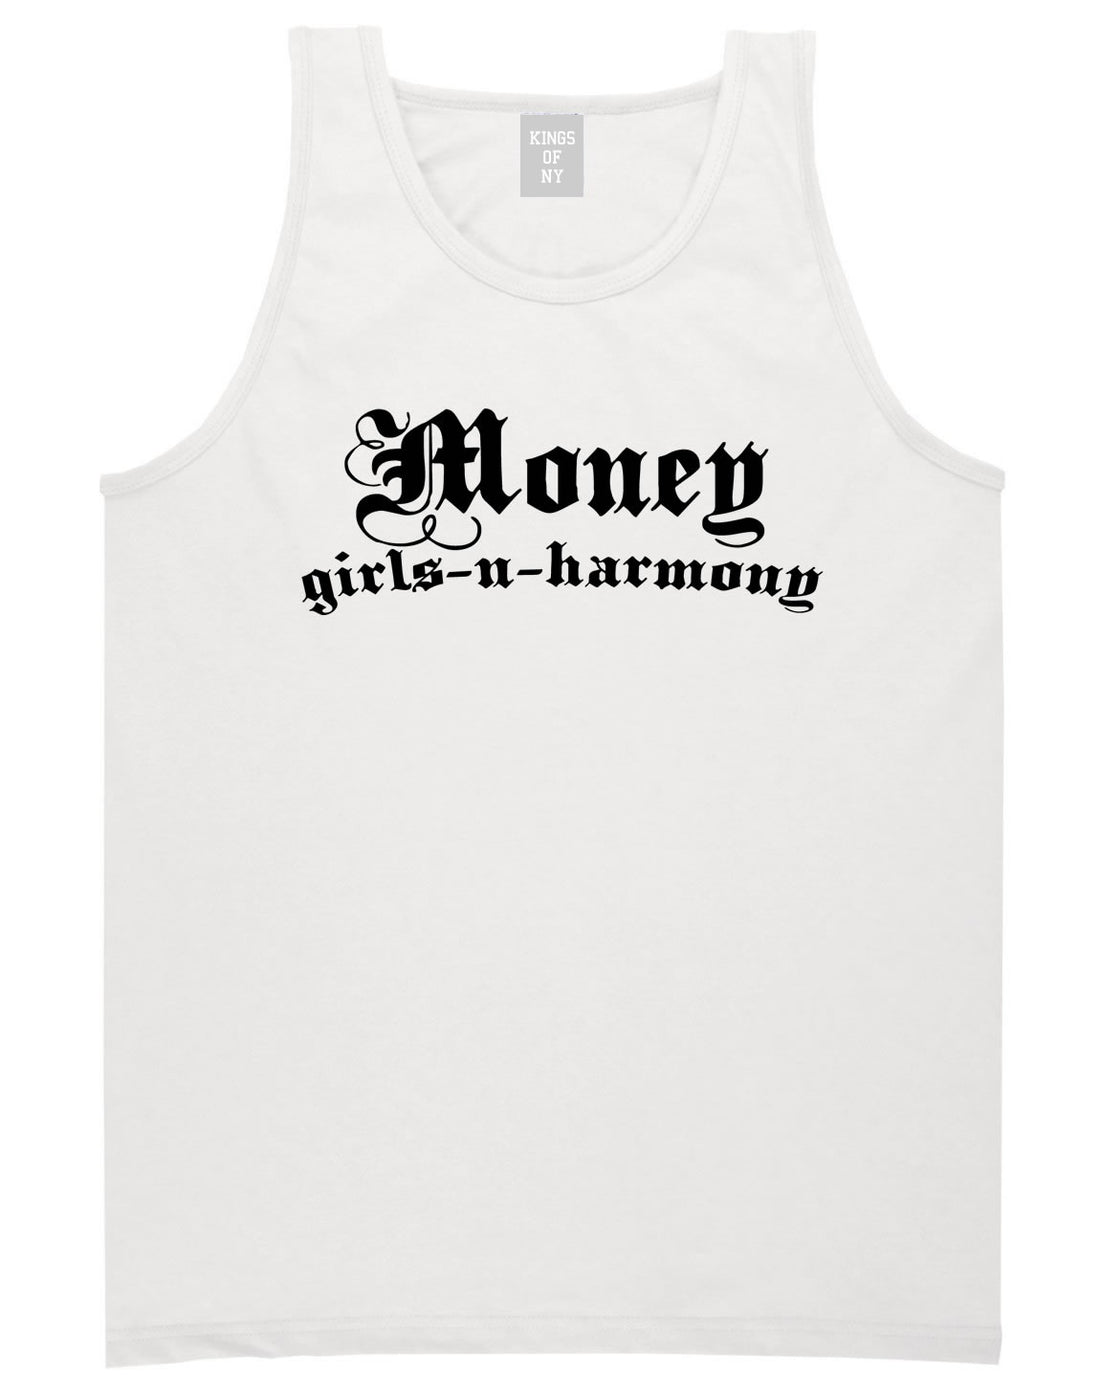 Money Girls And Harmony Tank Top in White By Kings Of NY